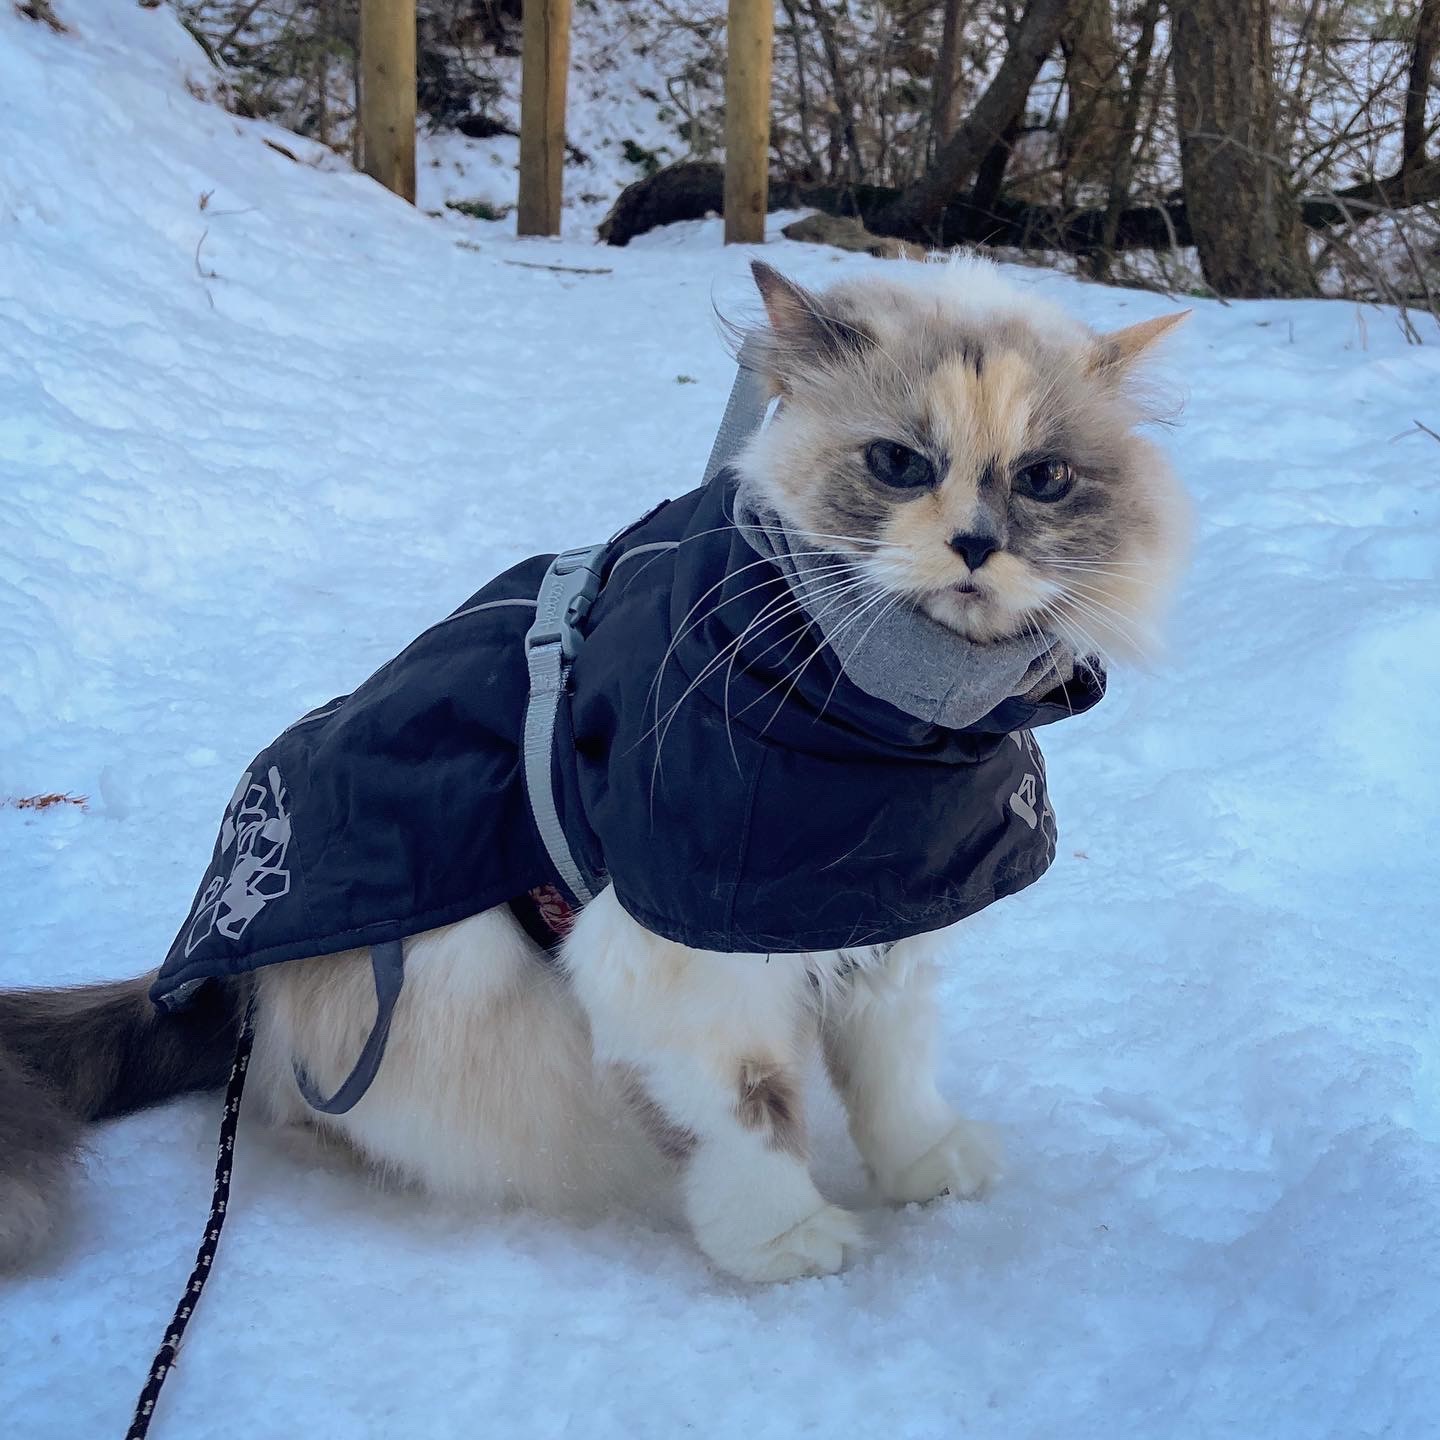 A fluffy white cat in a coat sits grumpily on a snow covered trail.